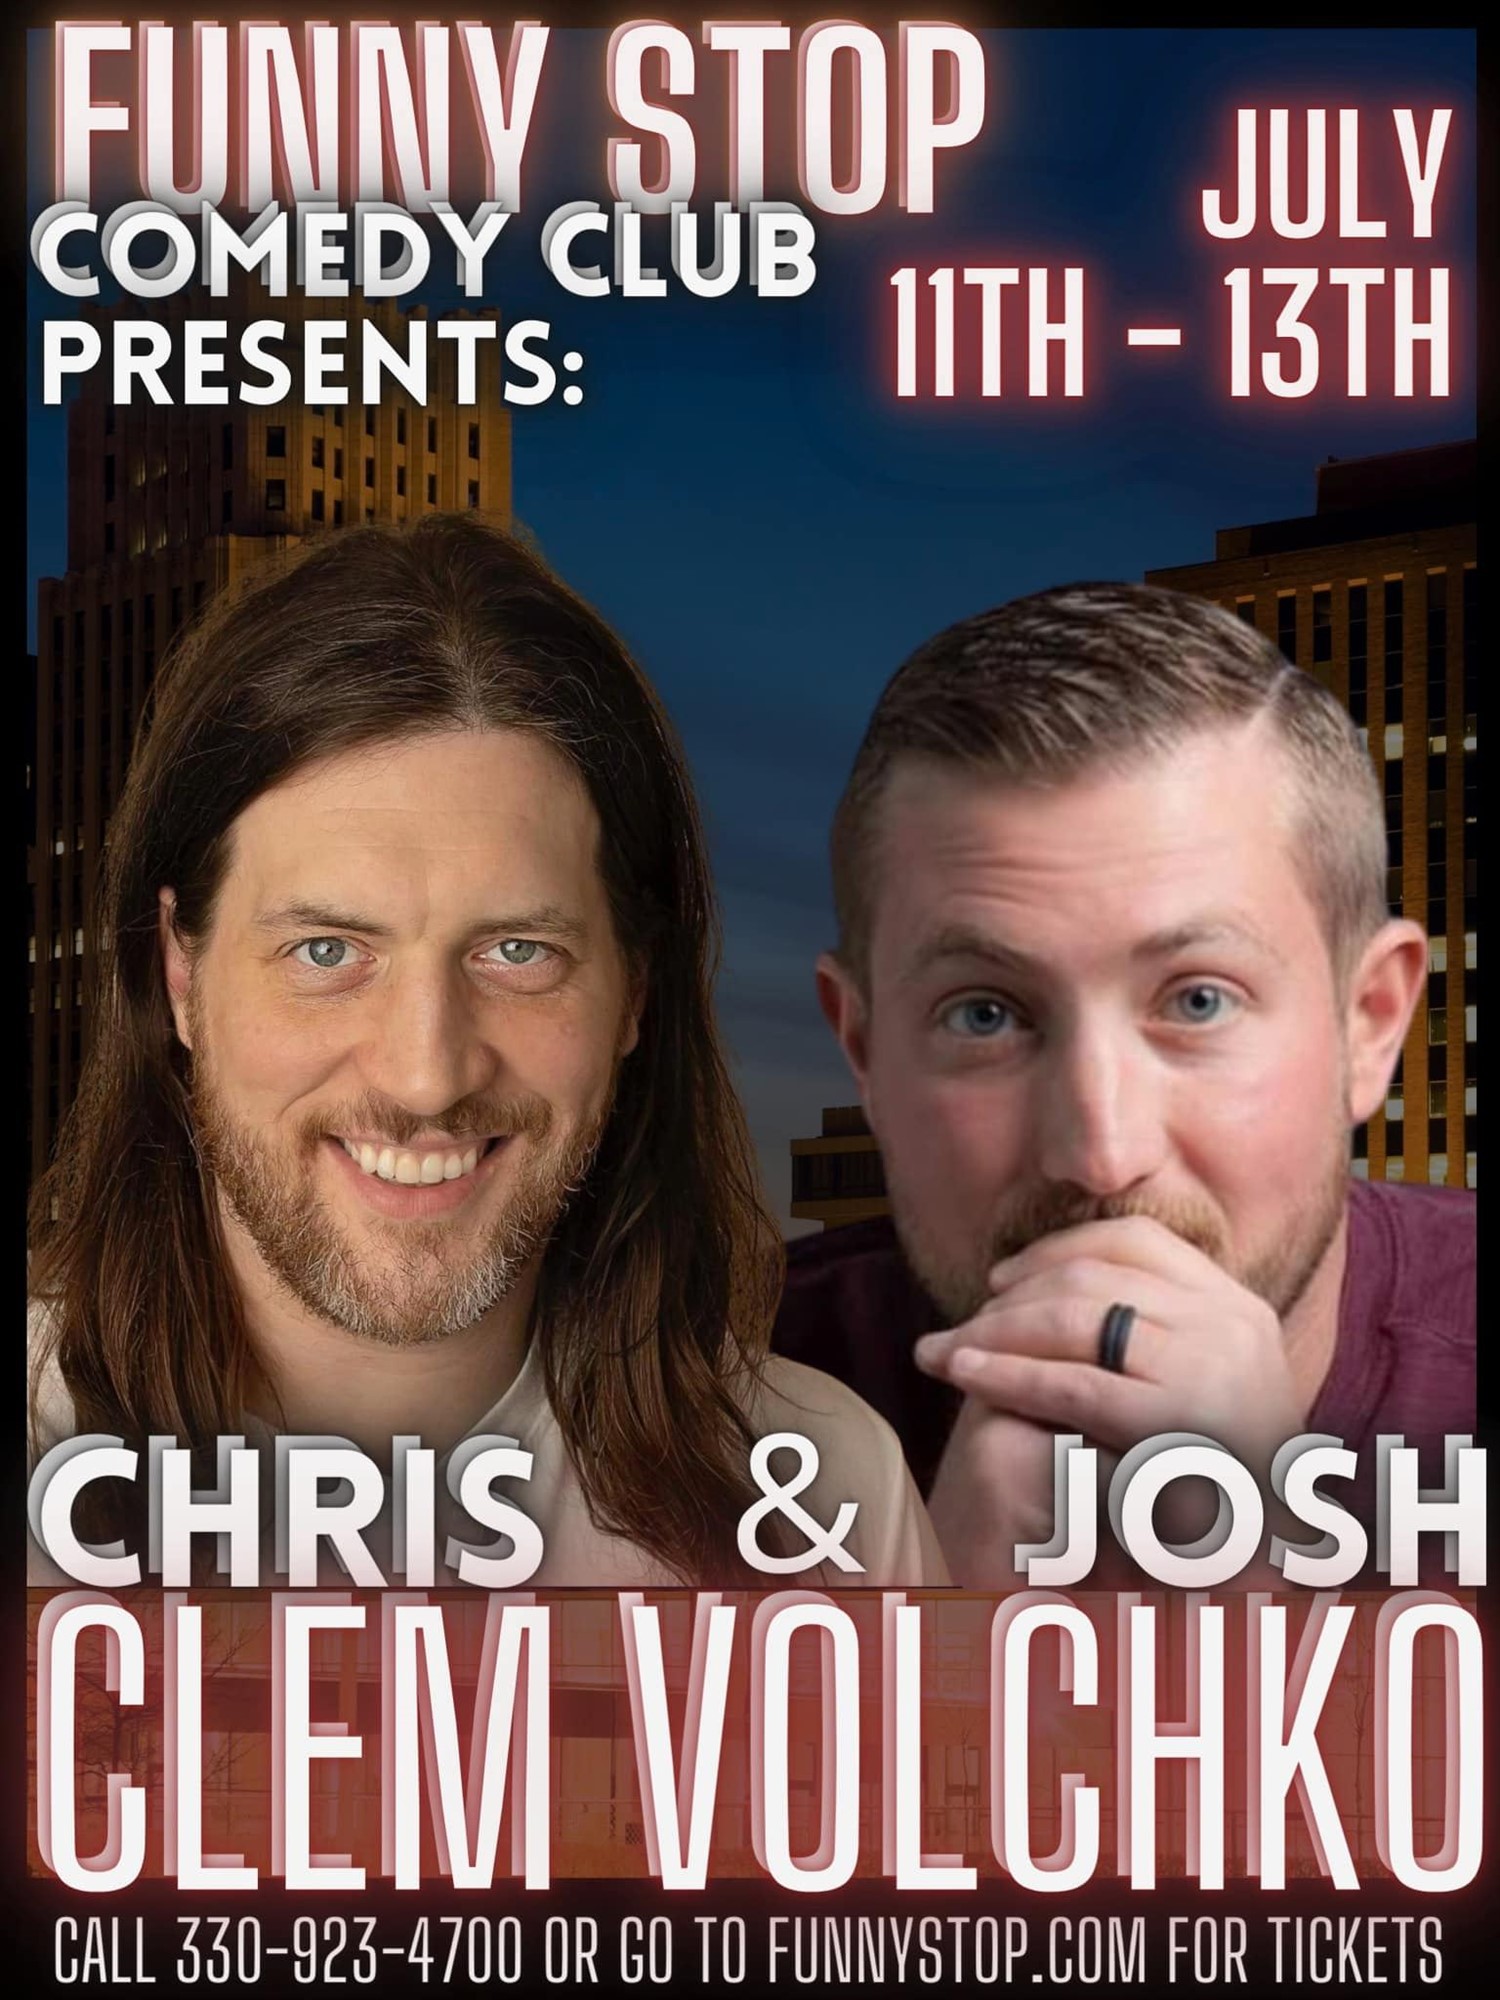 Chris Clem & Josh Volchko - Sat. 9:30PM Show Funny Stop Comedy Club on Jul 13, 21:30@Funny Stop Comedy Club - Buy tickets and Get information on Funny Stop funnystop.online